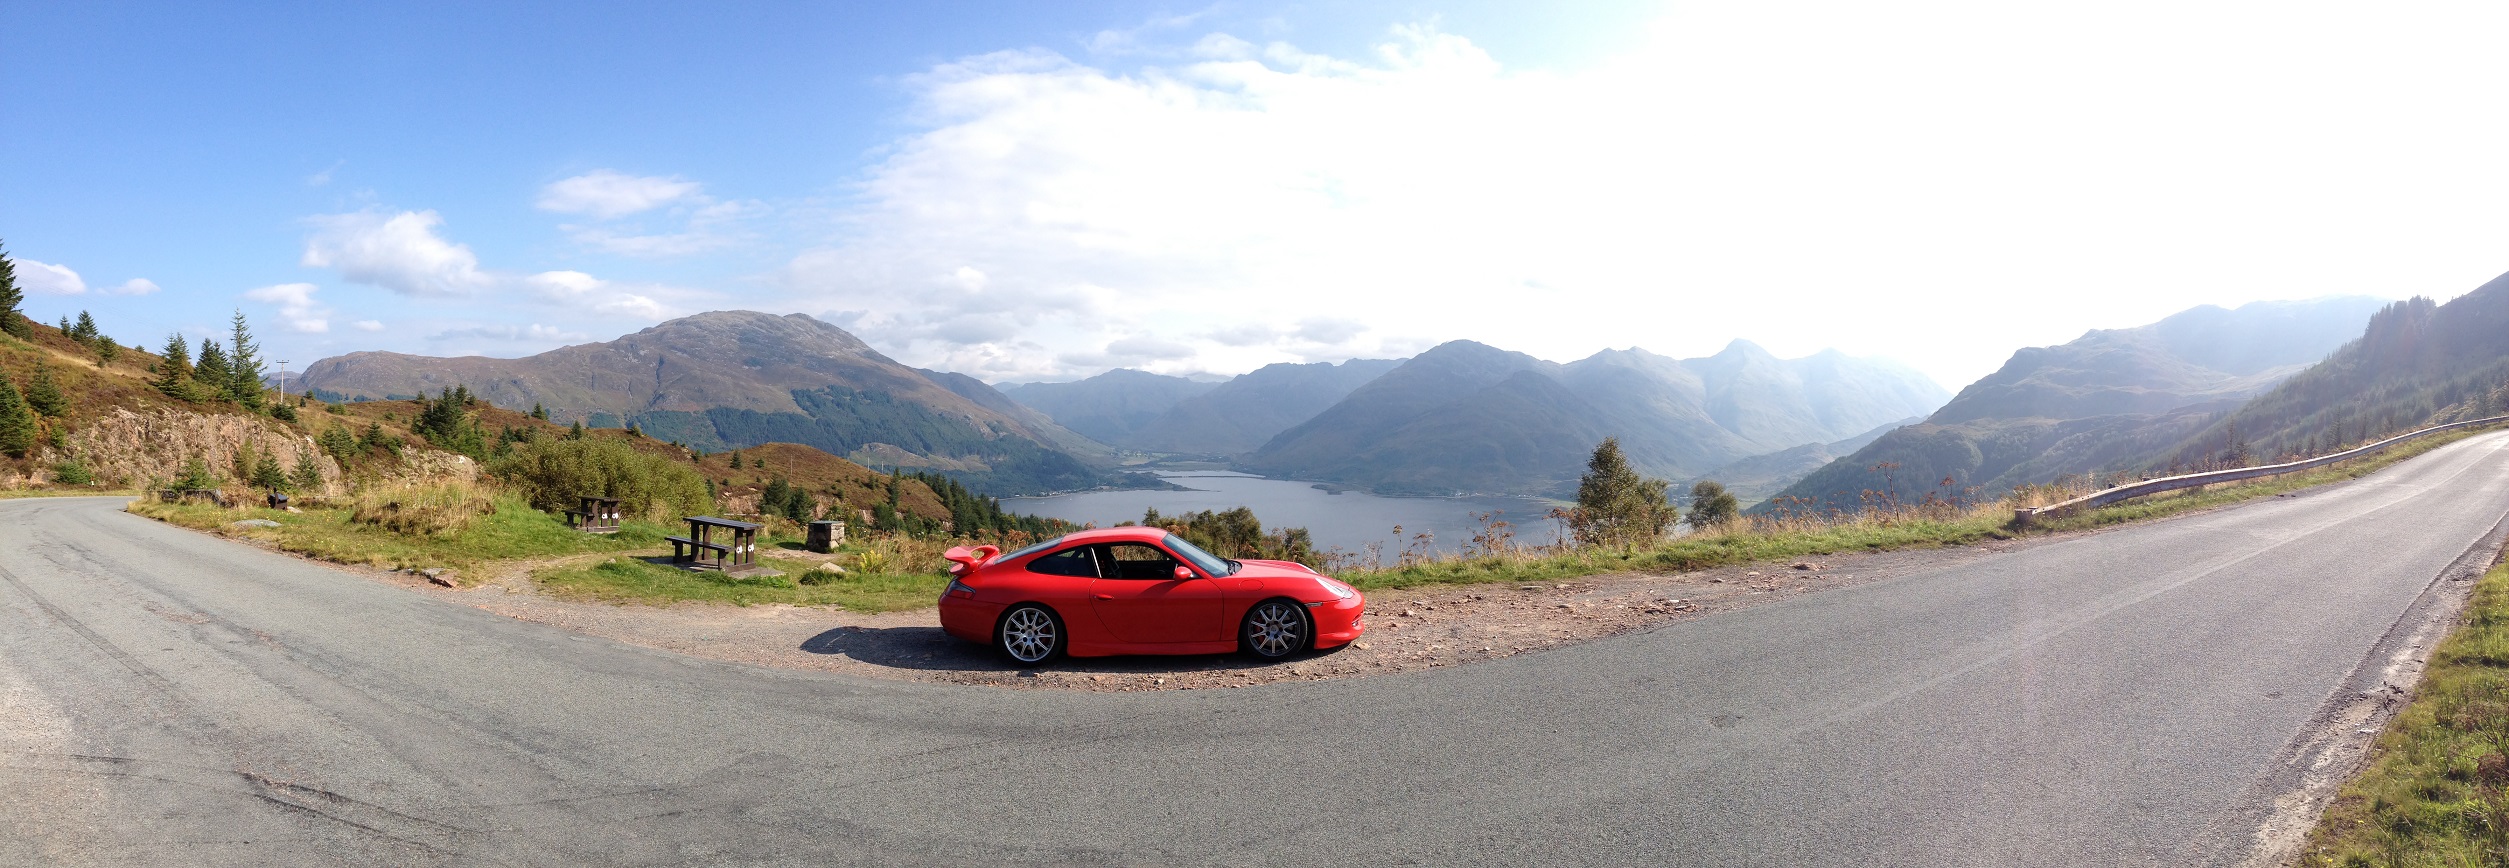 Highlands - Page 69 - Roads - PistonHeads